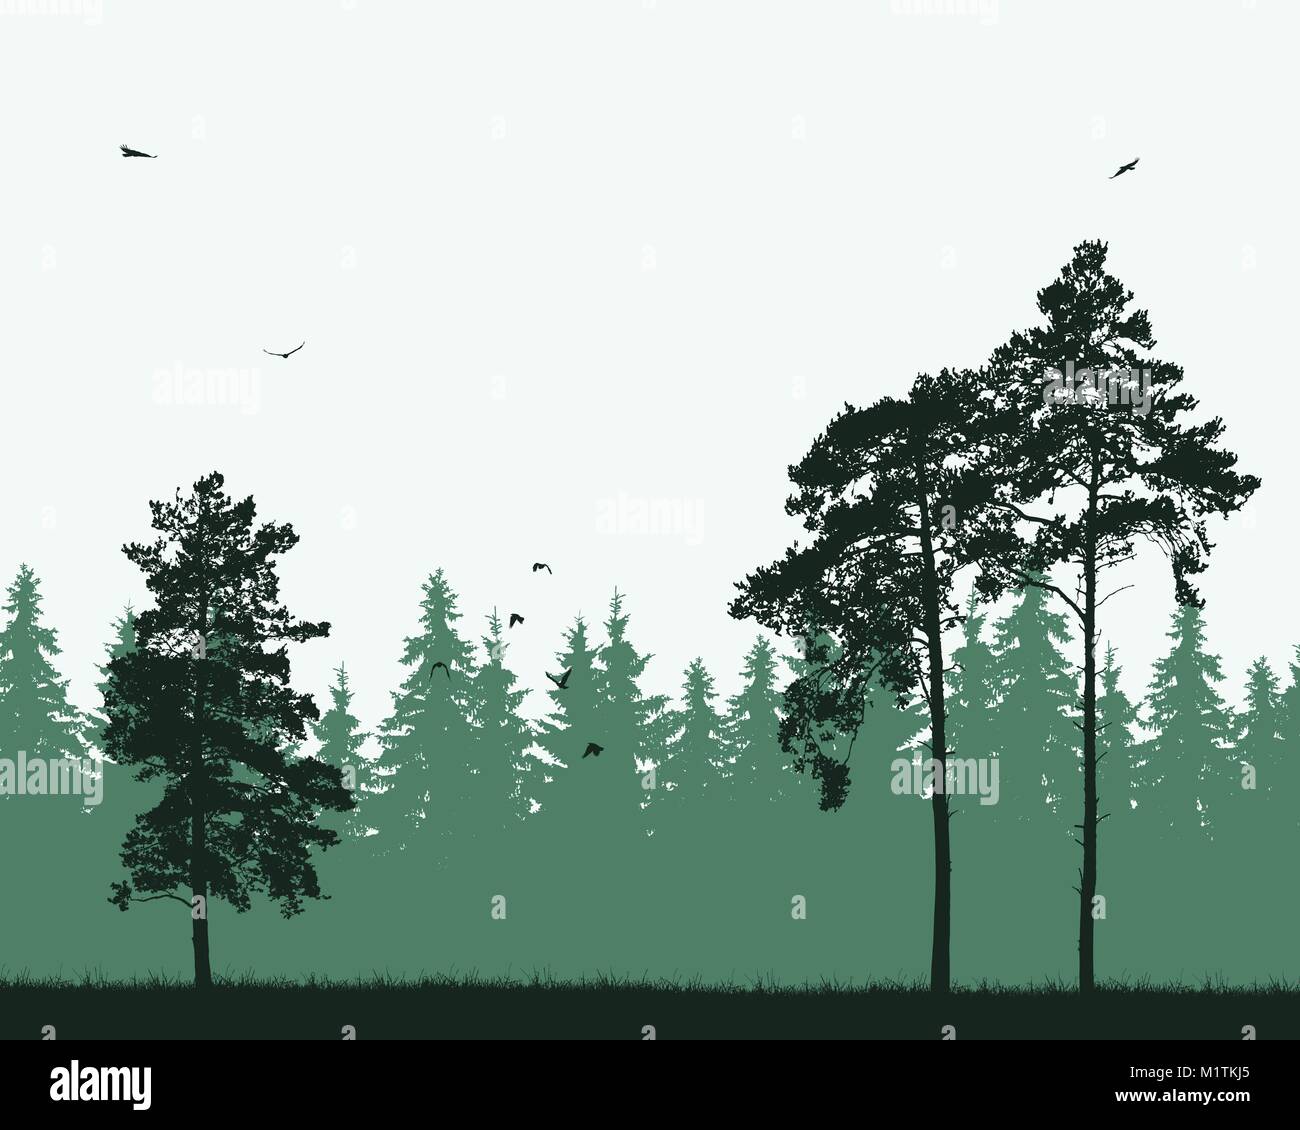 Vector illustration of coniferous and pine forest with flying ...